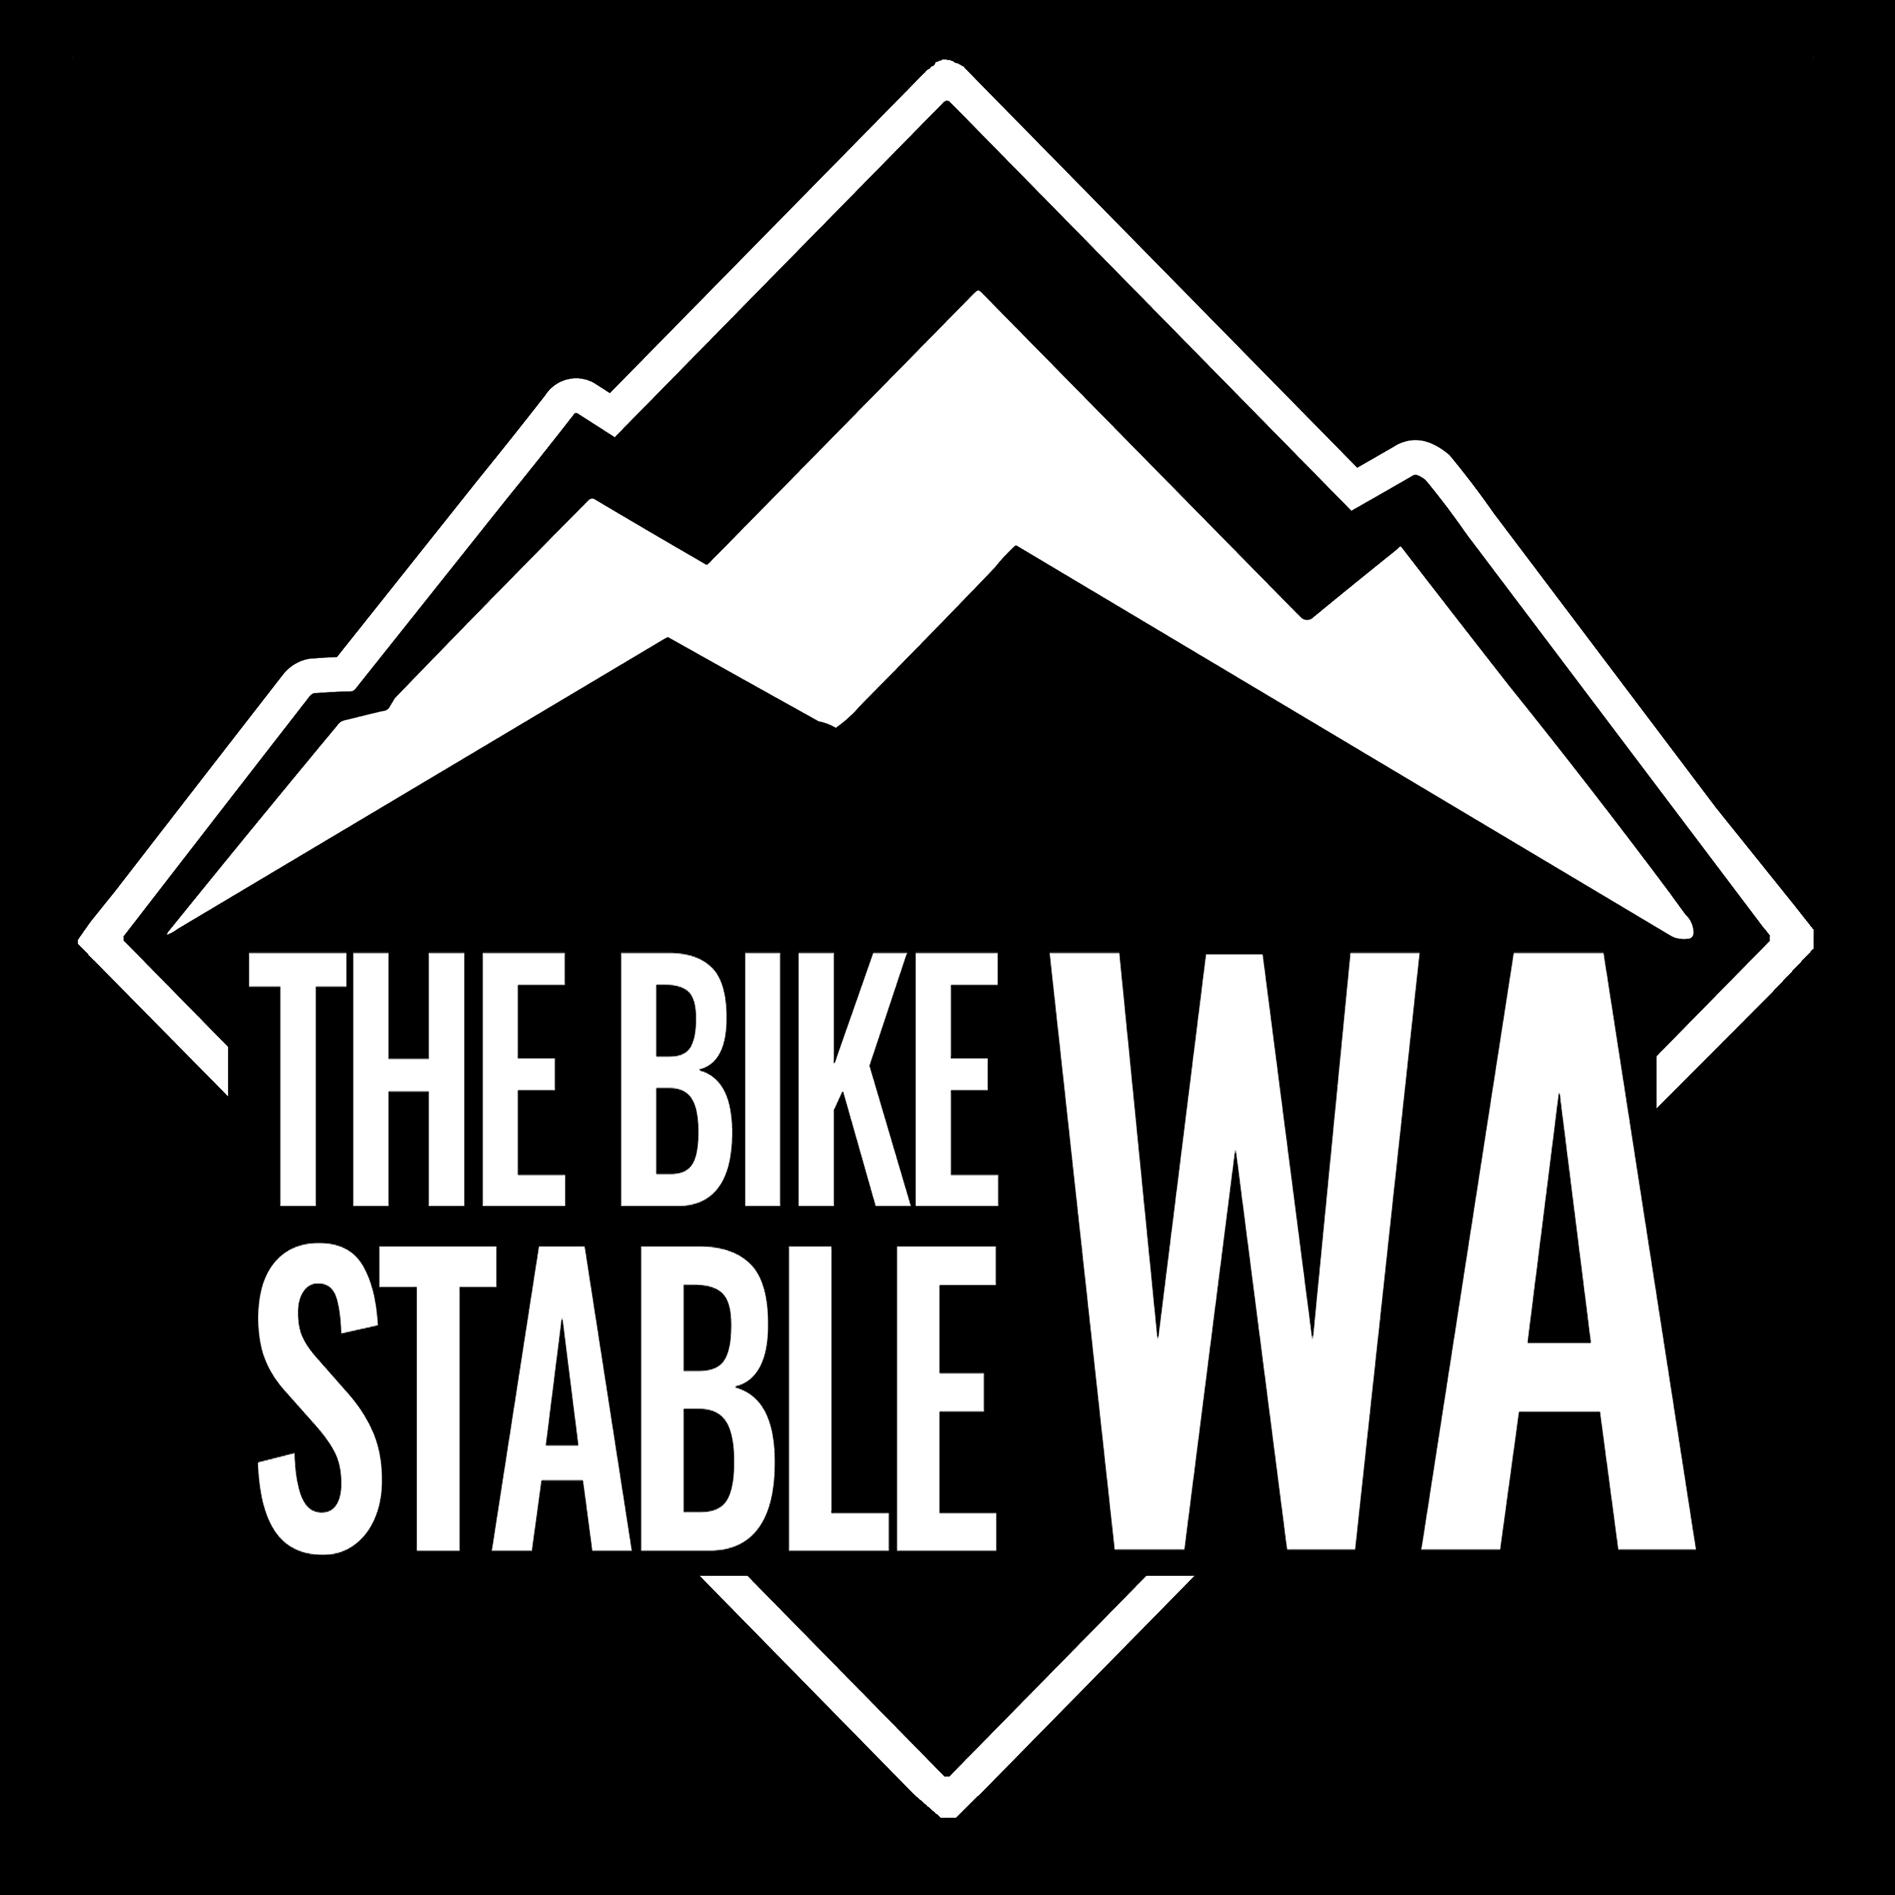 The Bike Stable WA. Your local Perth Hill's Bike Shop based in Glen Forrest and Sawyers Valley